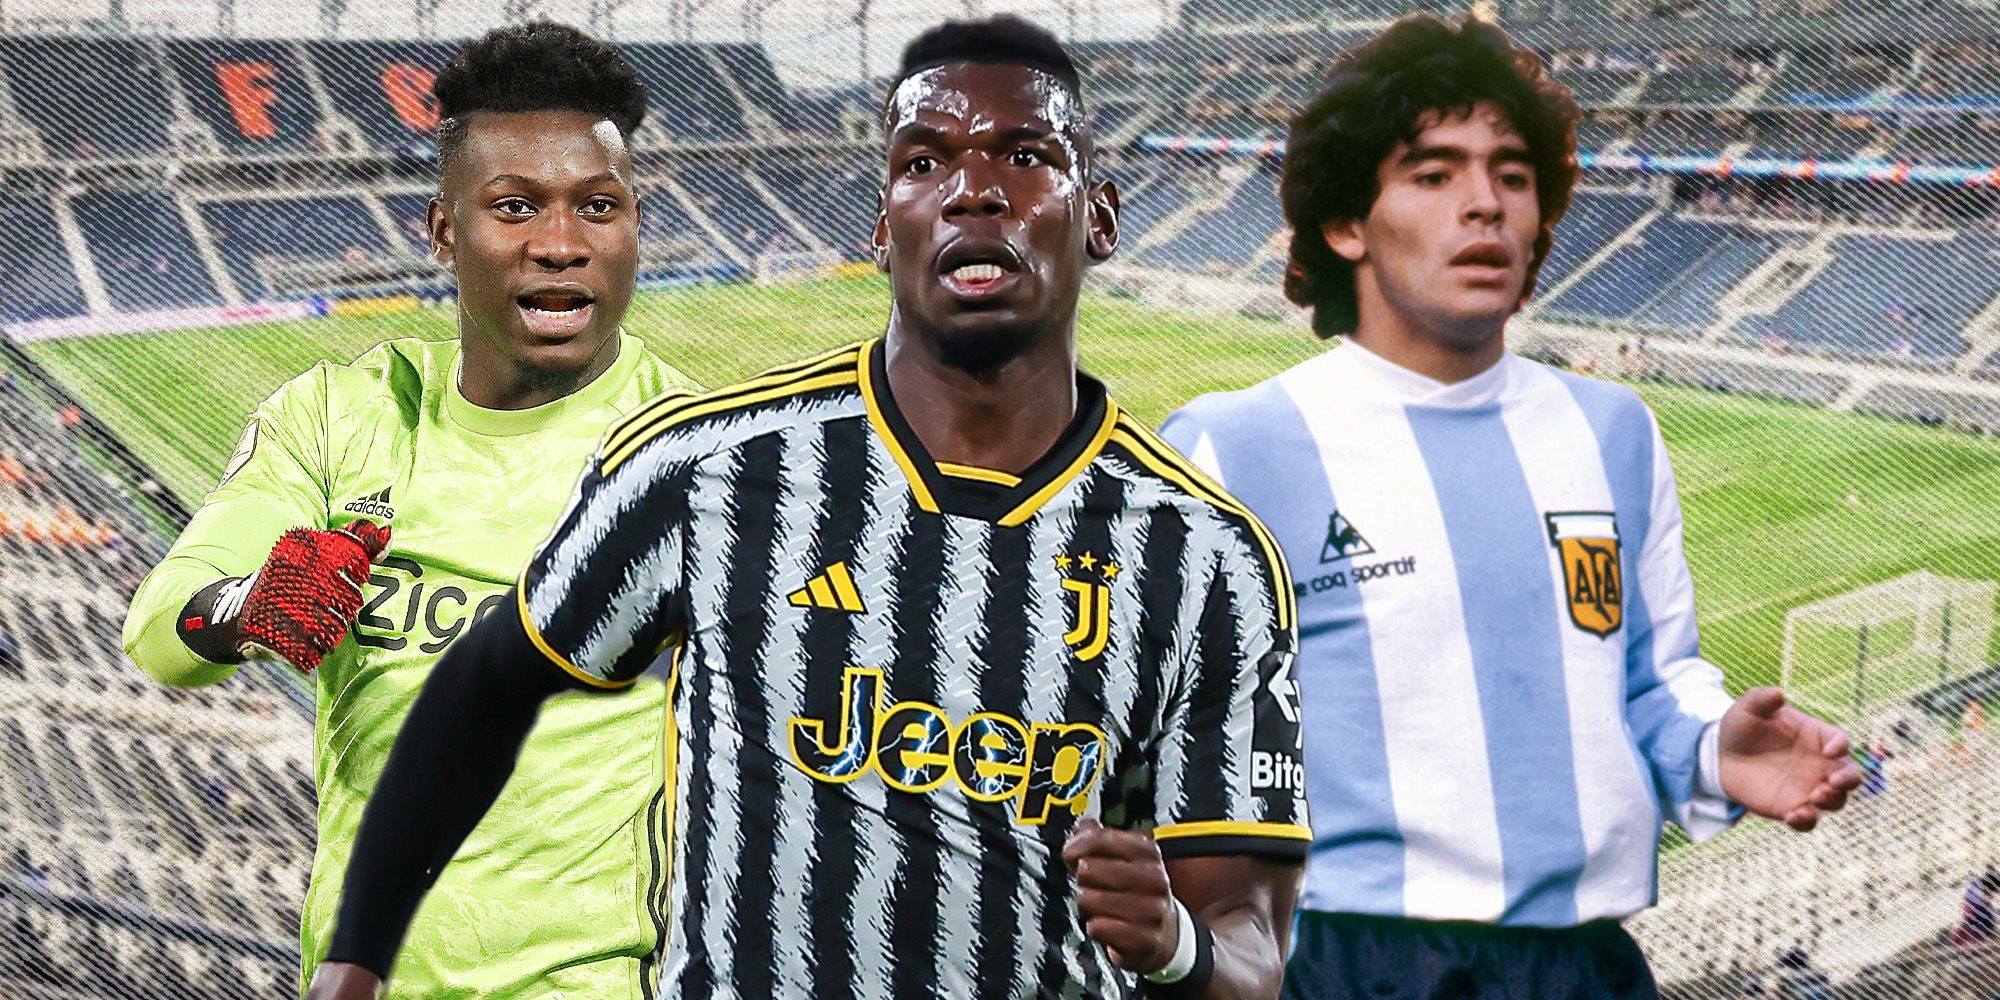 Paul Pogba in a Juventus shirt in the middle, with Diego Maradona in Argentina shirt, Andre Onana in Ajax shirt either side